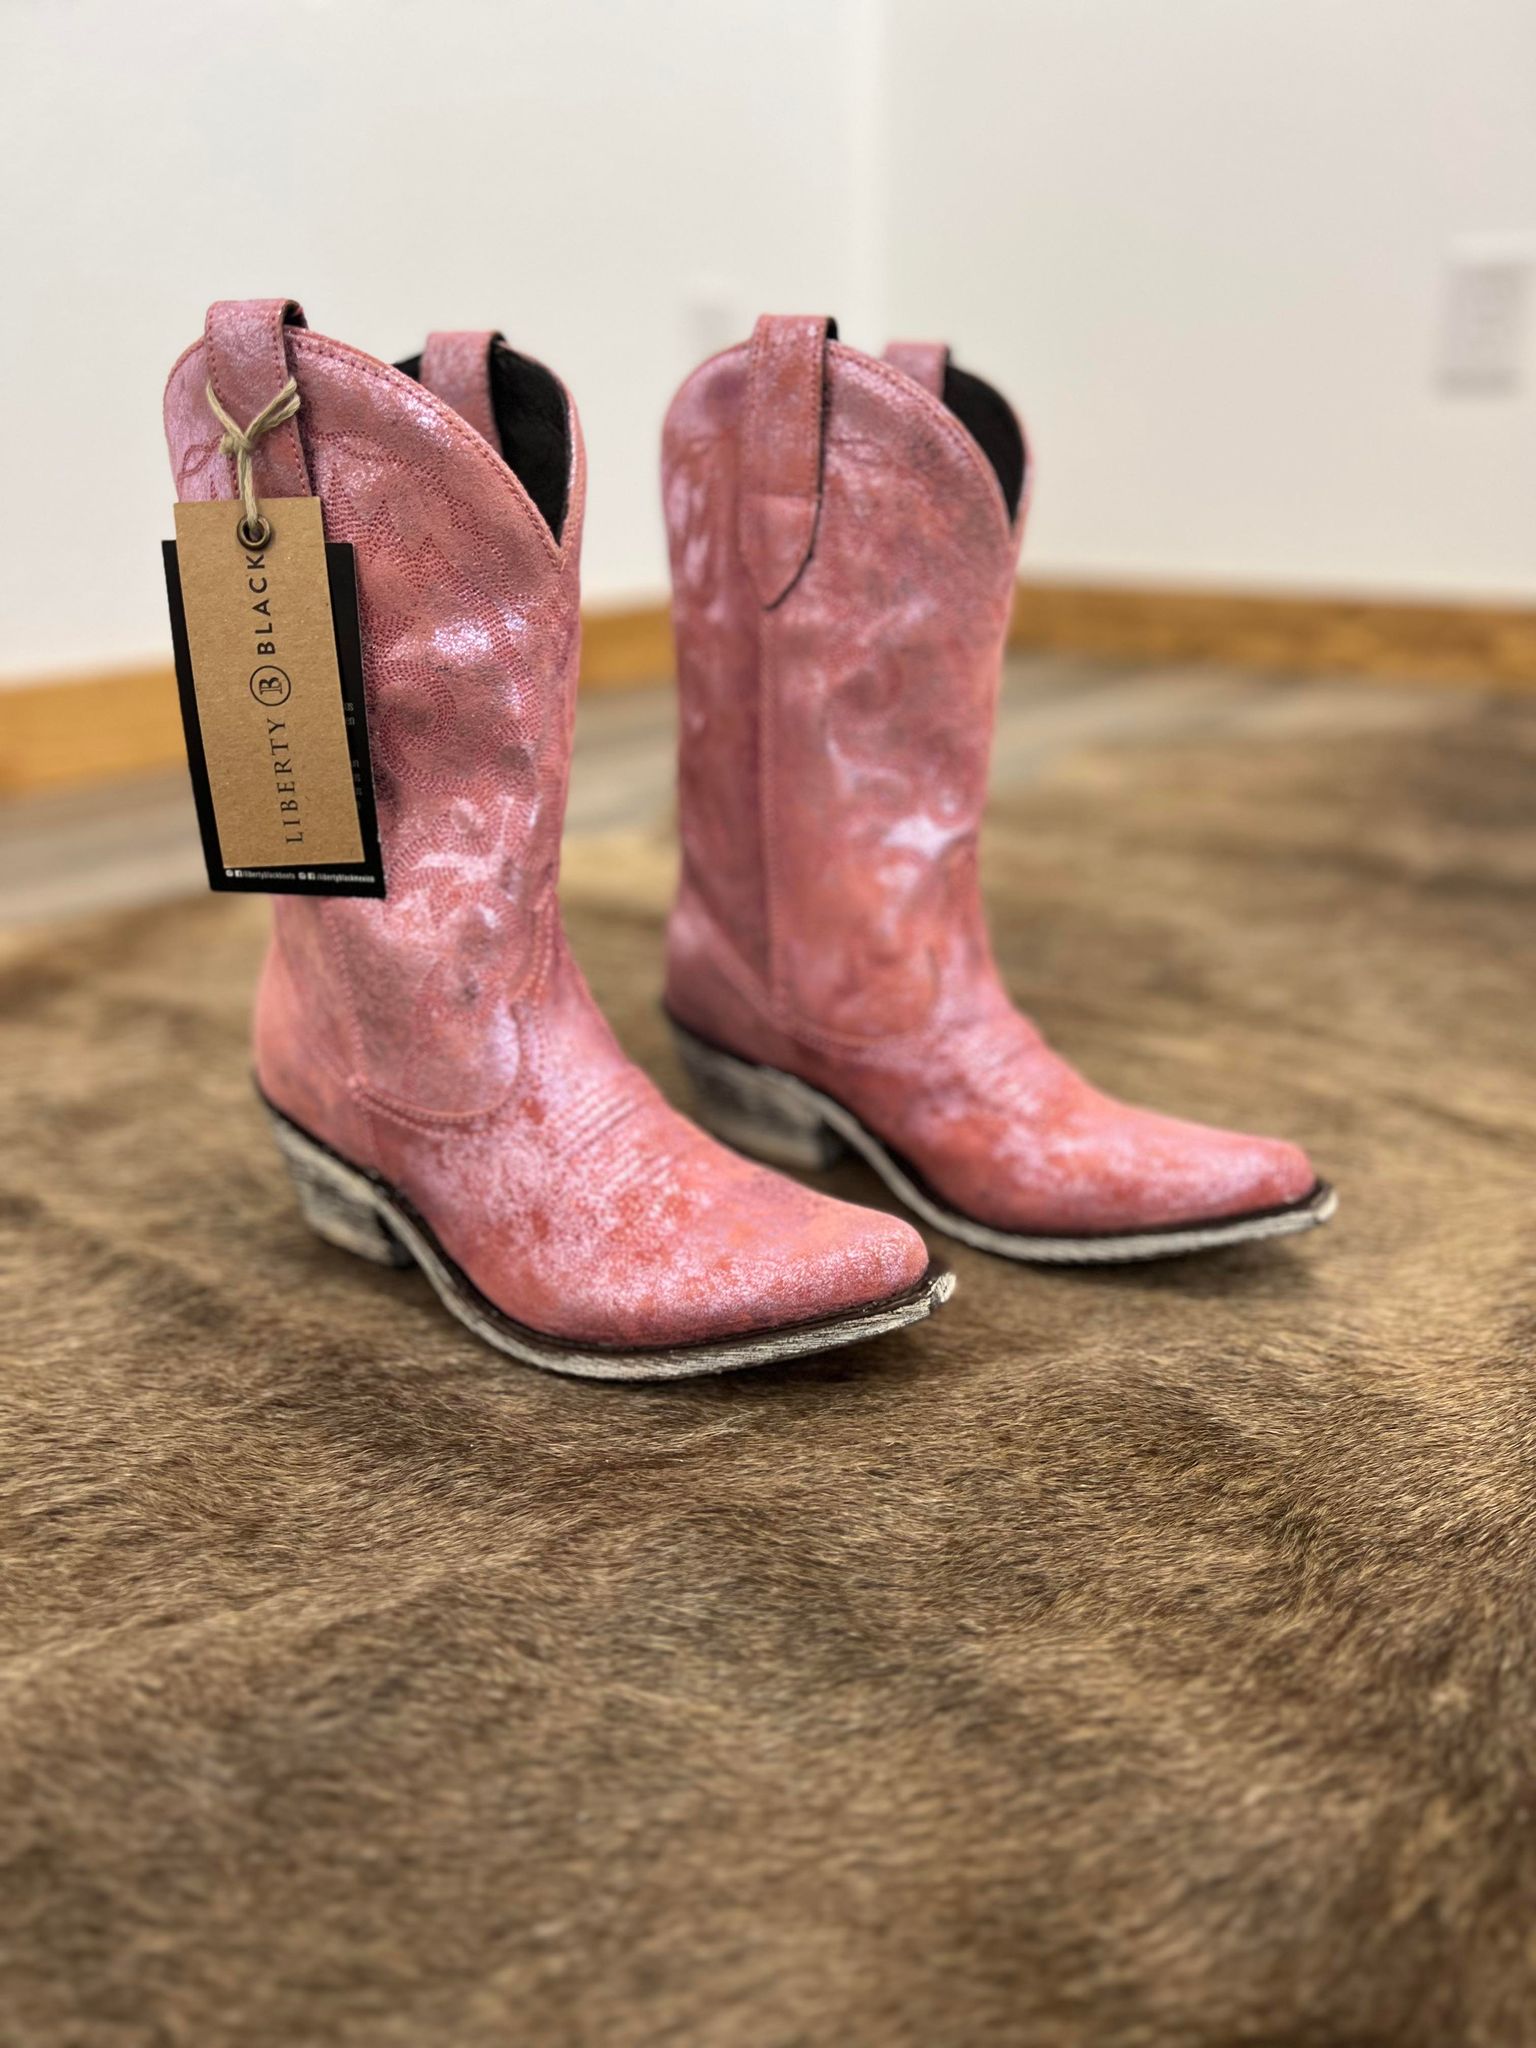 Liberty Black Sienna Boots in Rosa-Women's Booties-Liberty Black-Lucky J Boots & More, Women's, Men's, & Kids Western Store Located in Carthage, MO